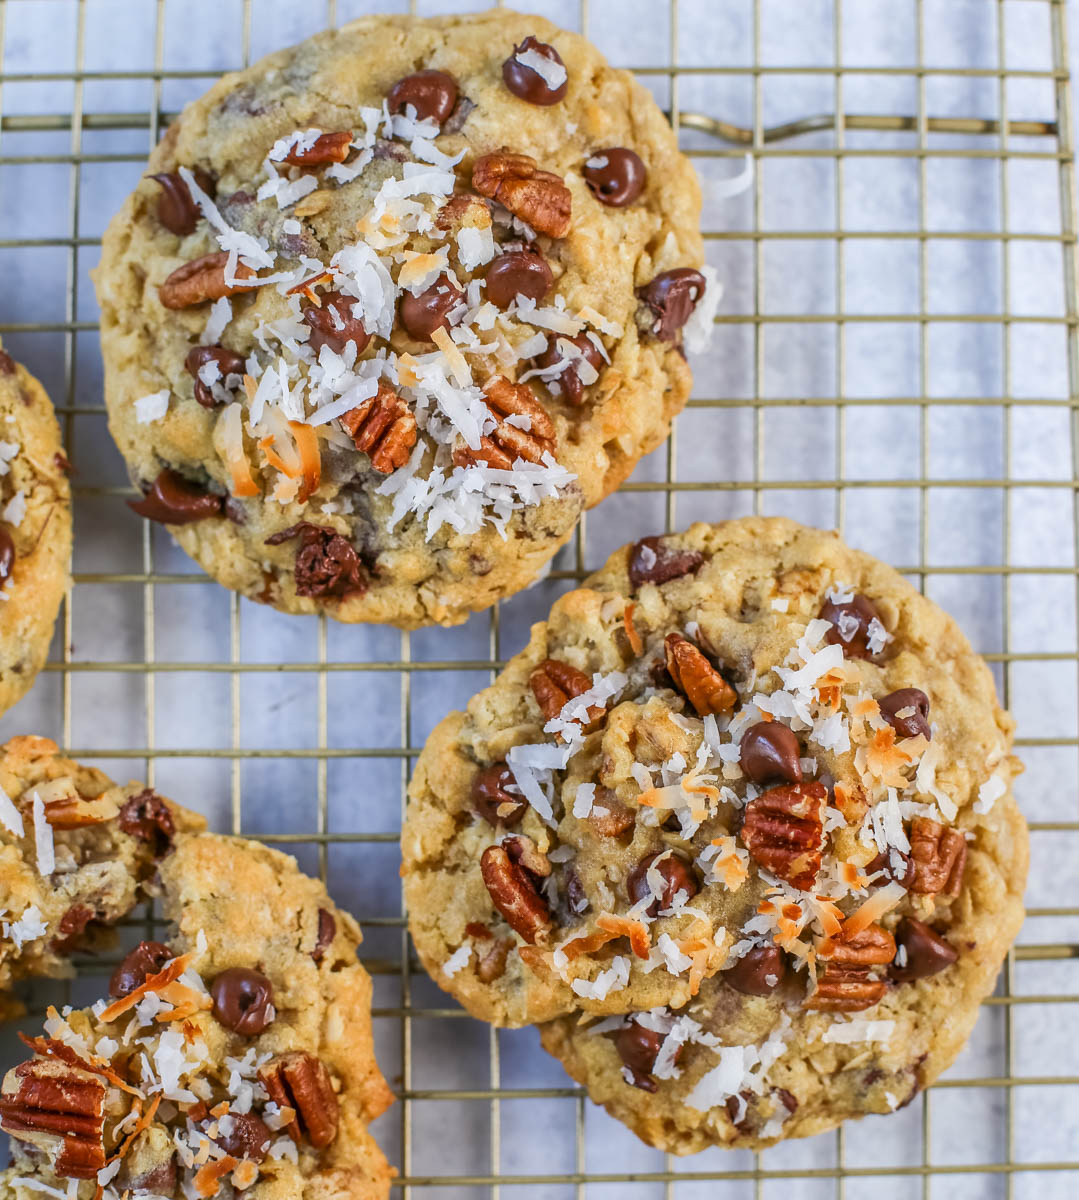 These soft, chewy, chunky Cowboy Cookies are made with oats, chocolate chips, shredded coconut, and pecans making them perfectly sweet, salty, nutty, and hearty. This is the best Cowboy Cookies recipe!